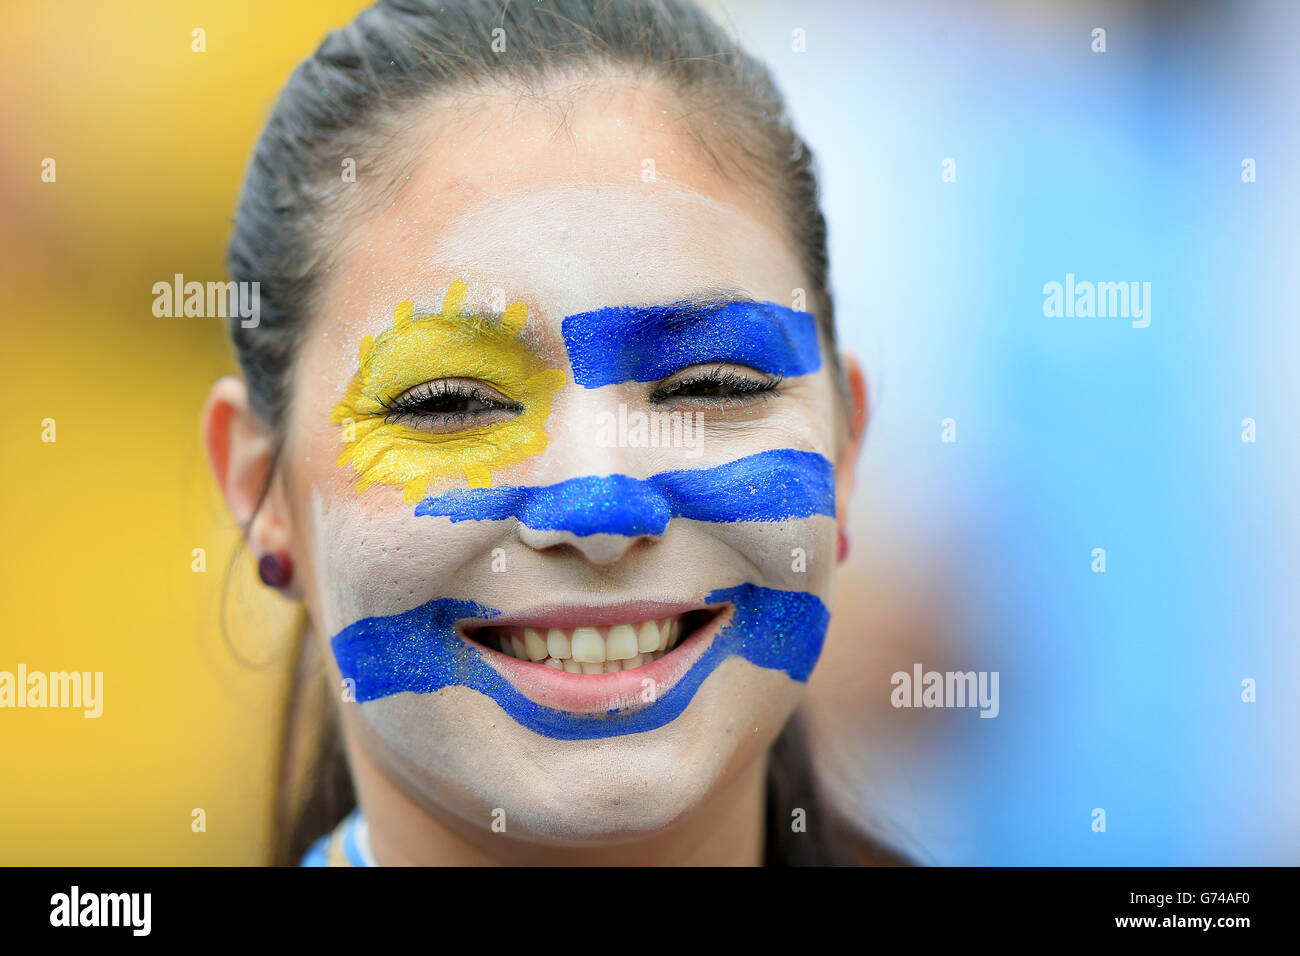 A Uruguay fan wearing face paint before the game during the Group D match the Estadio do Sao Paulo, Sao Paulo, Brazil. Stock Photo